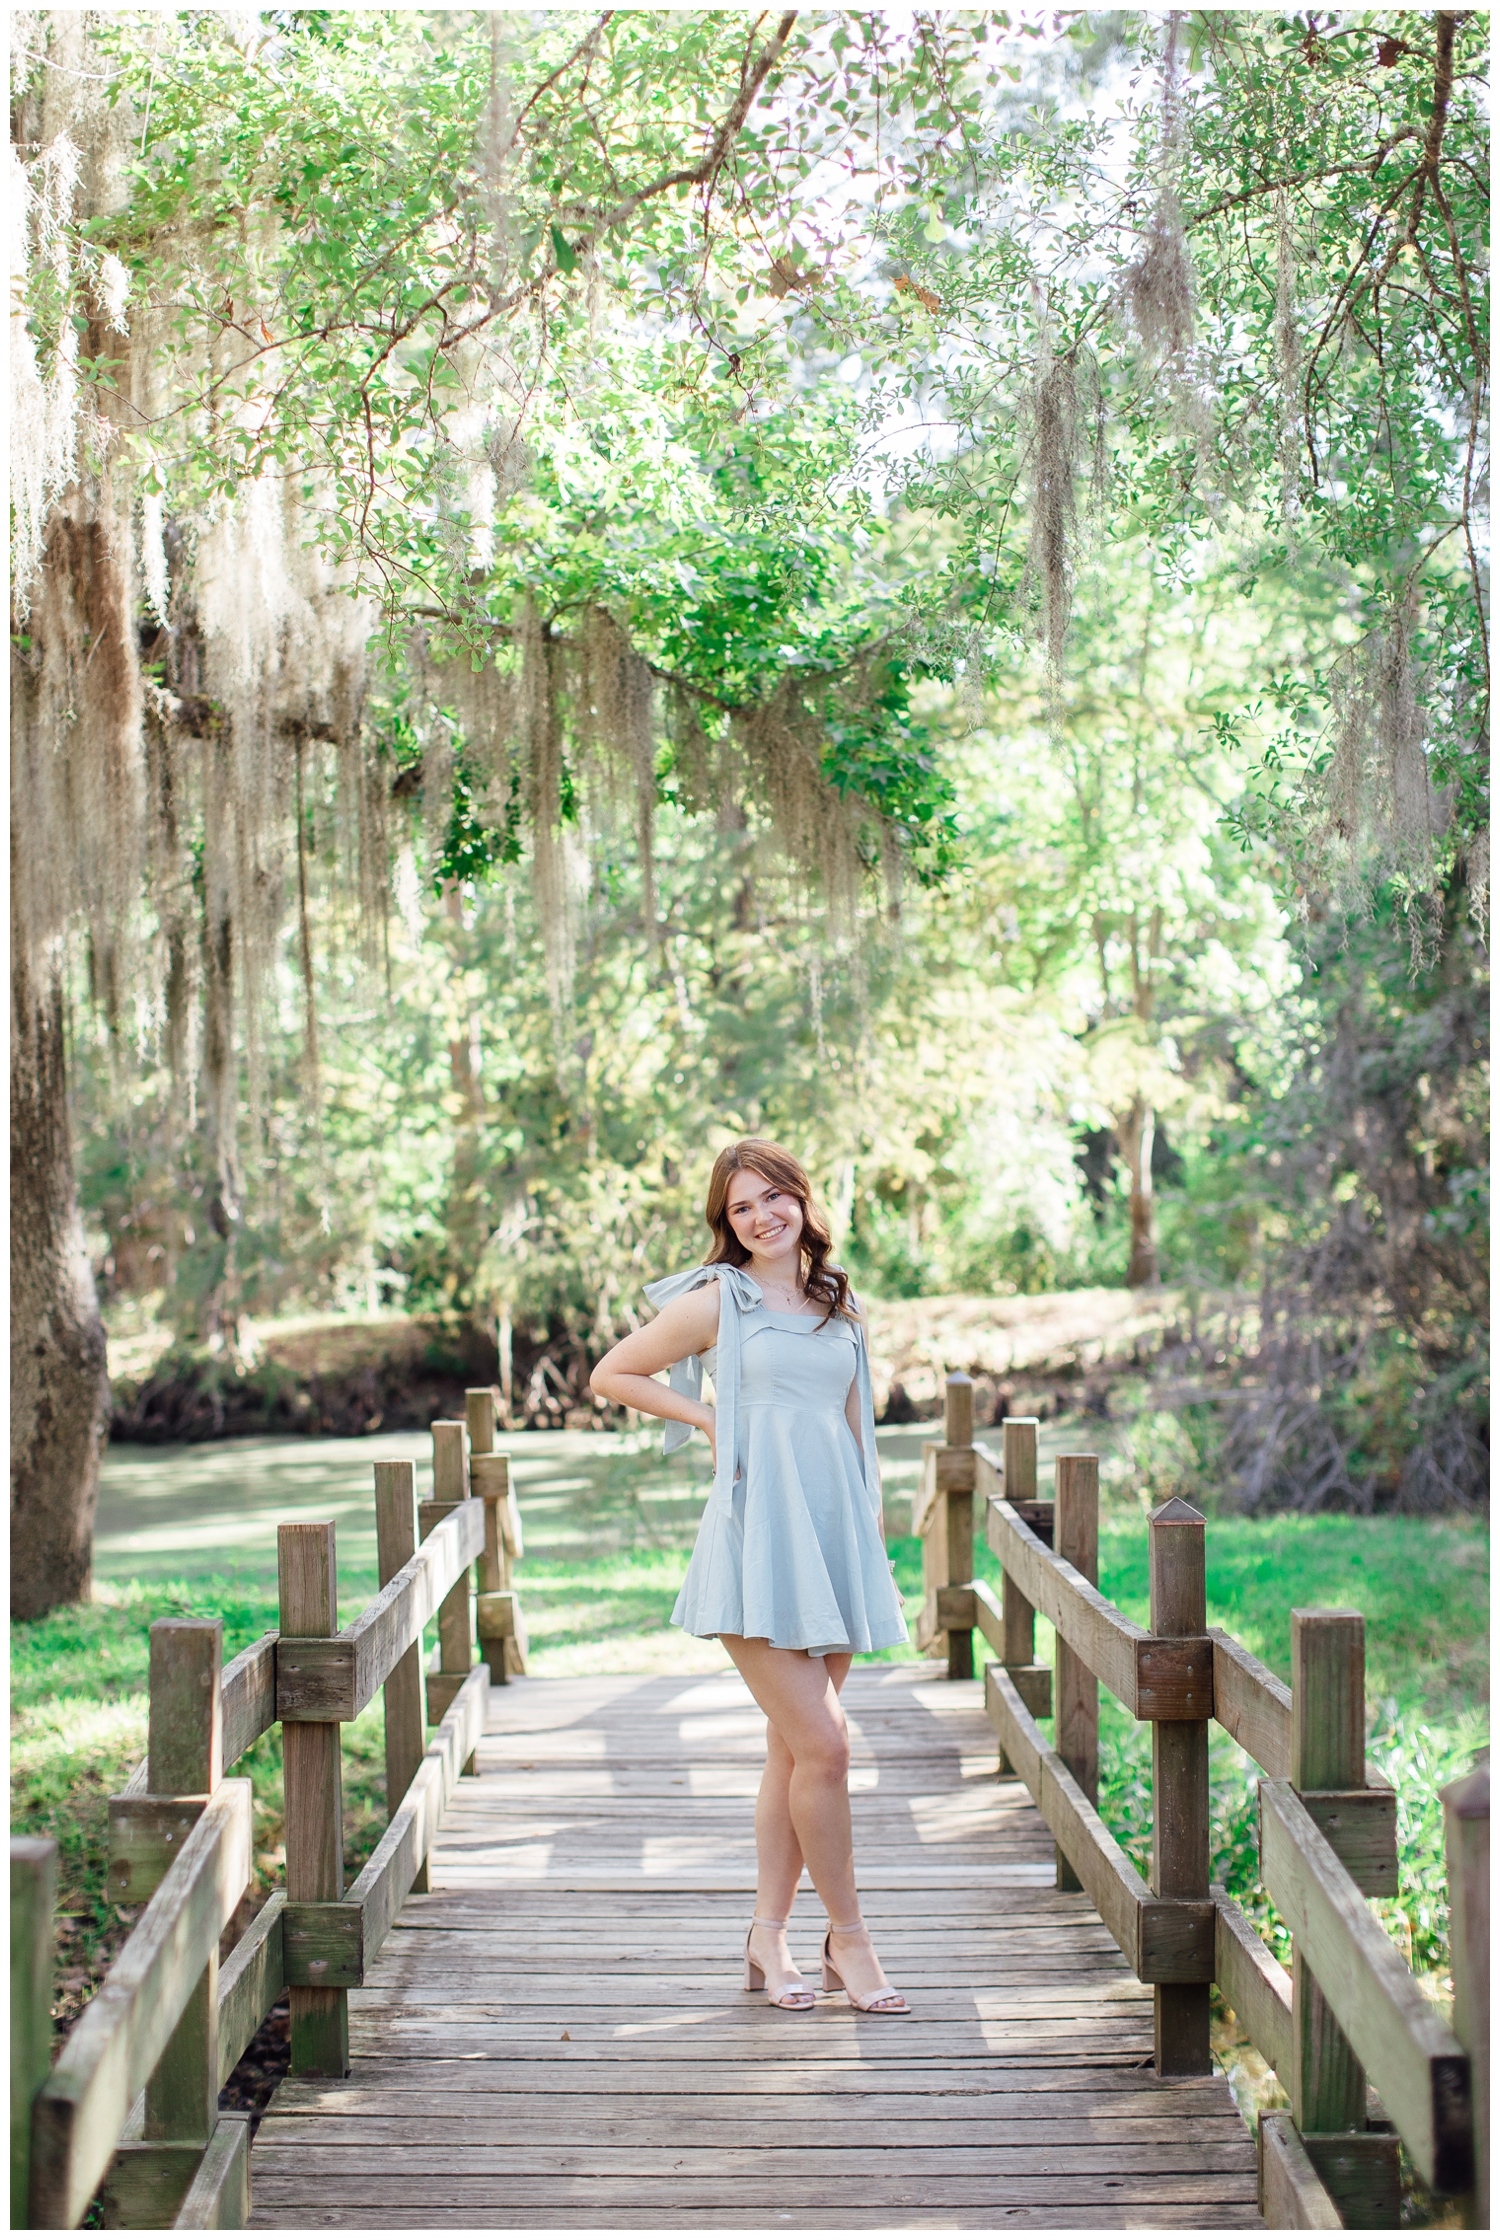 Fall senior photos Houston with girl in blue dress standing on bridge under mossy trees